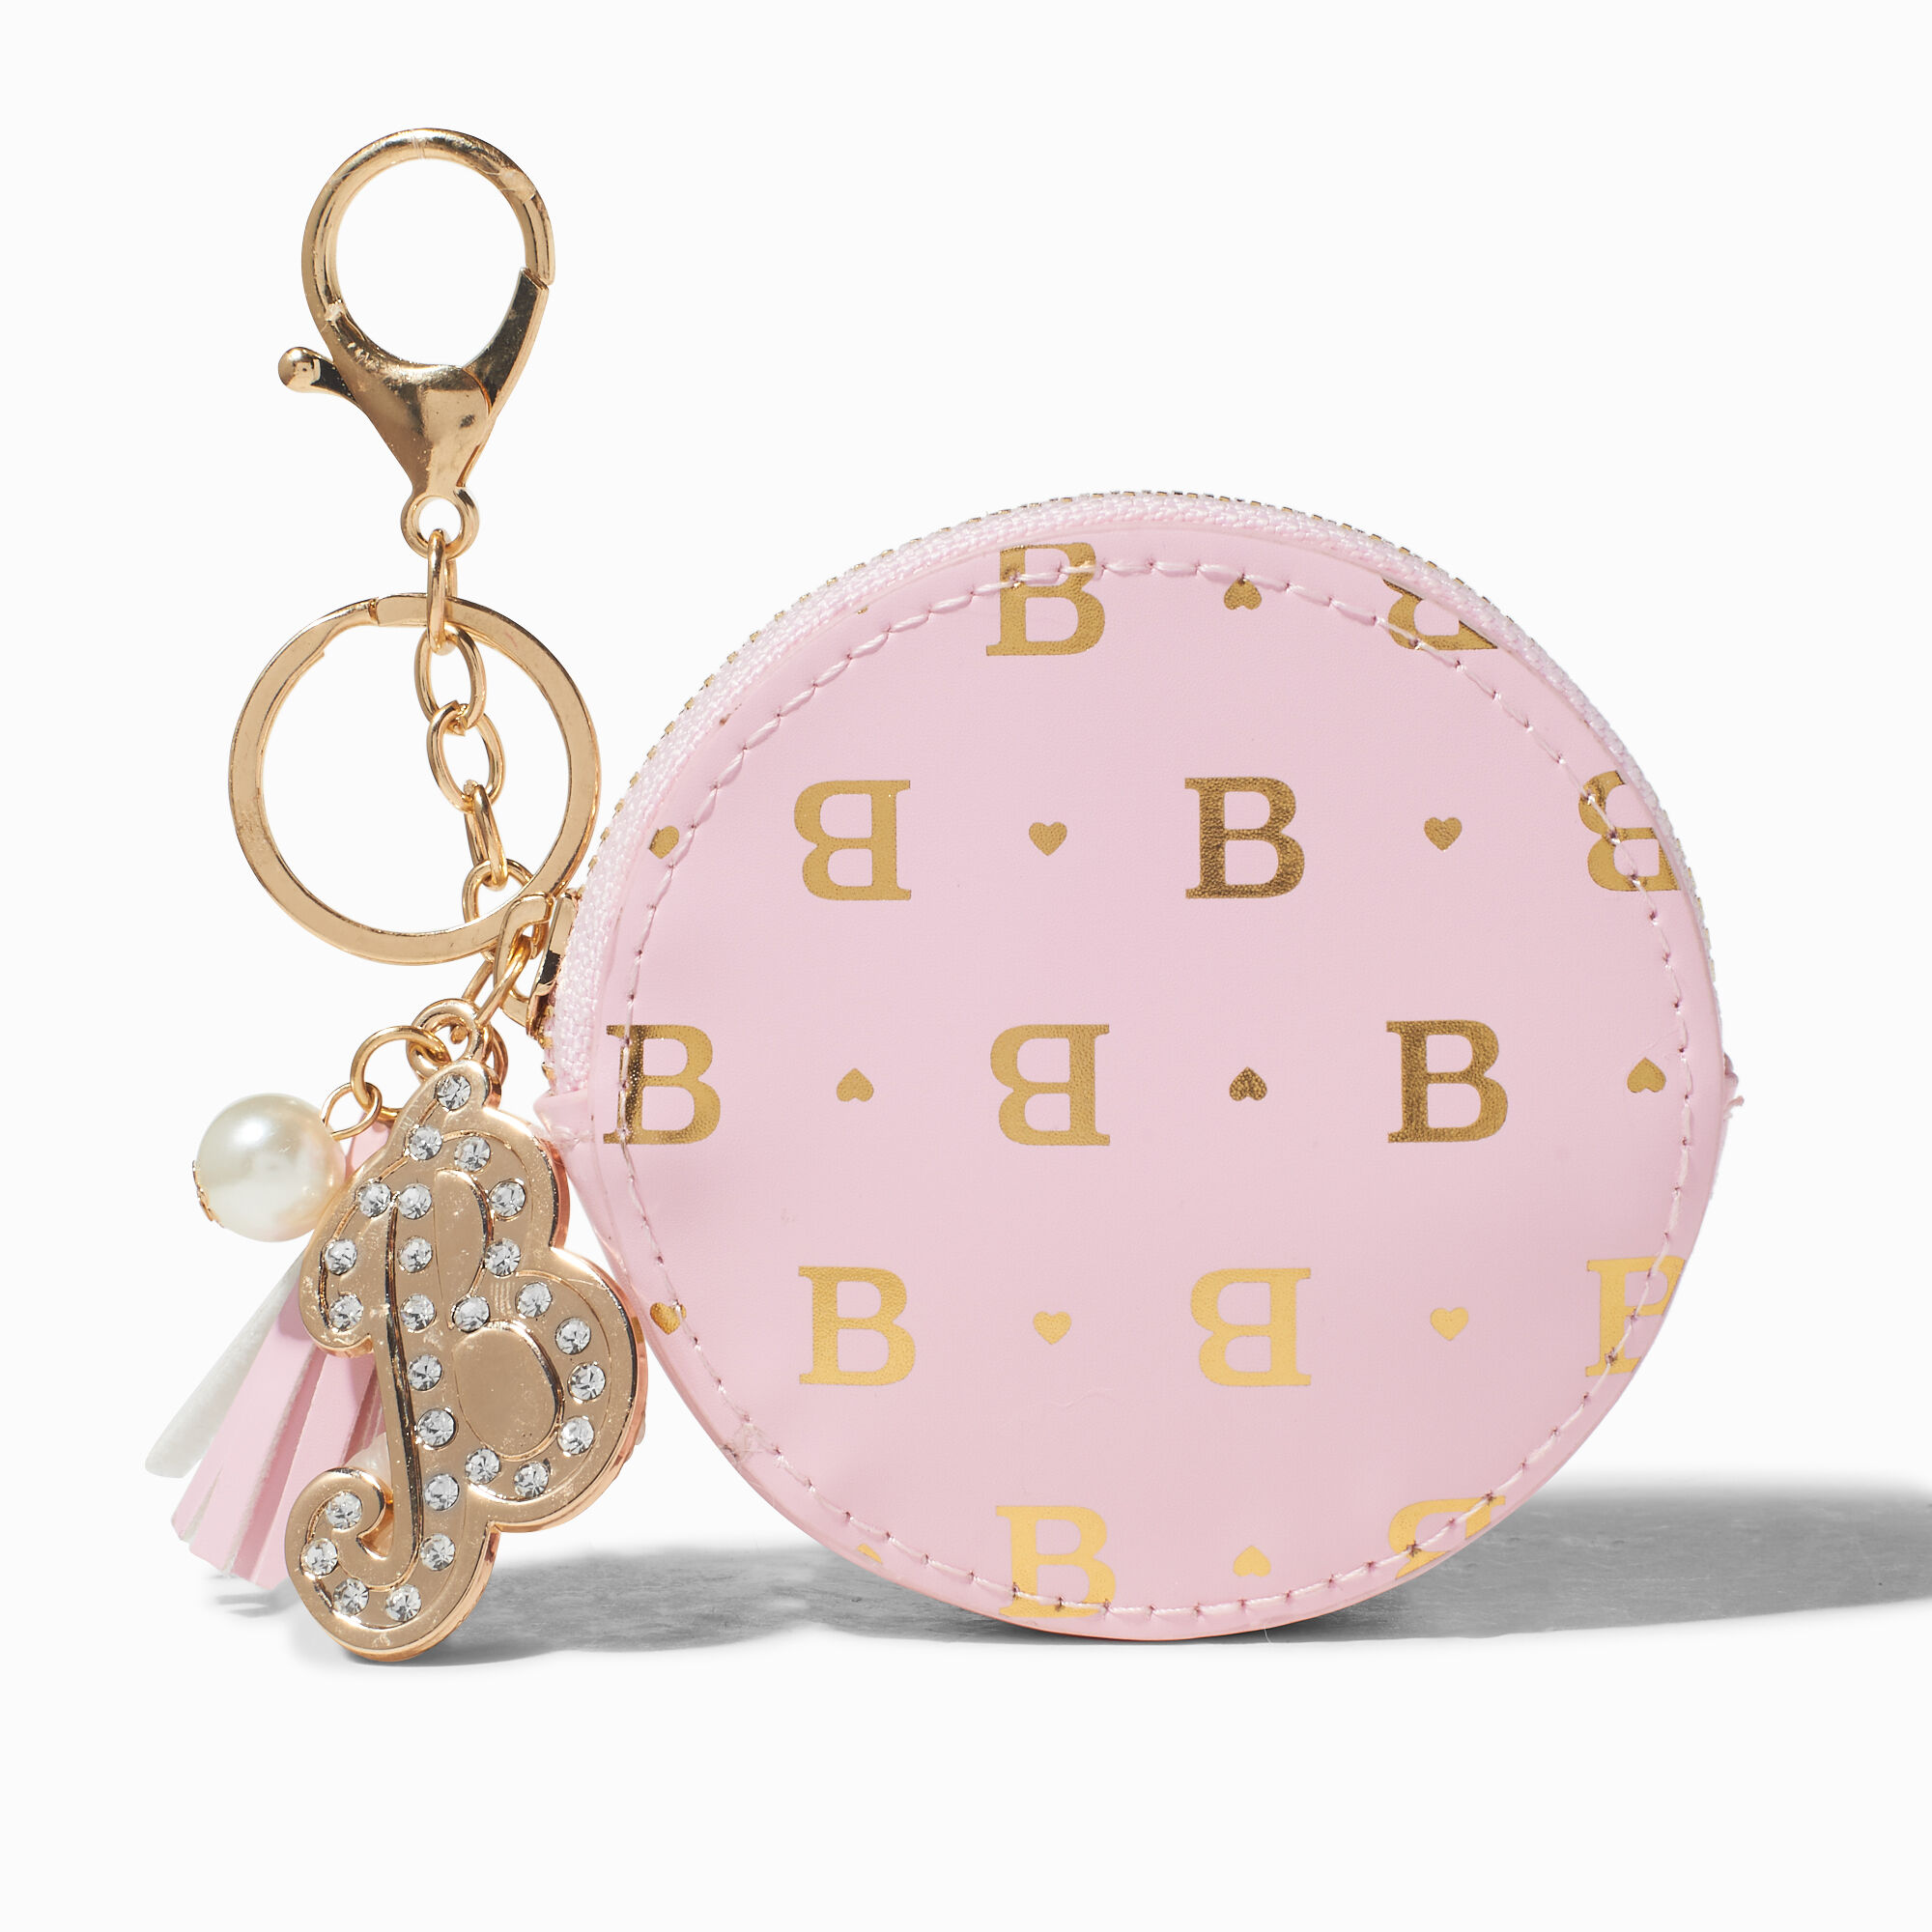 View Claires en Initial Coin Purse B Gold information